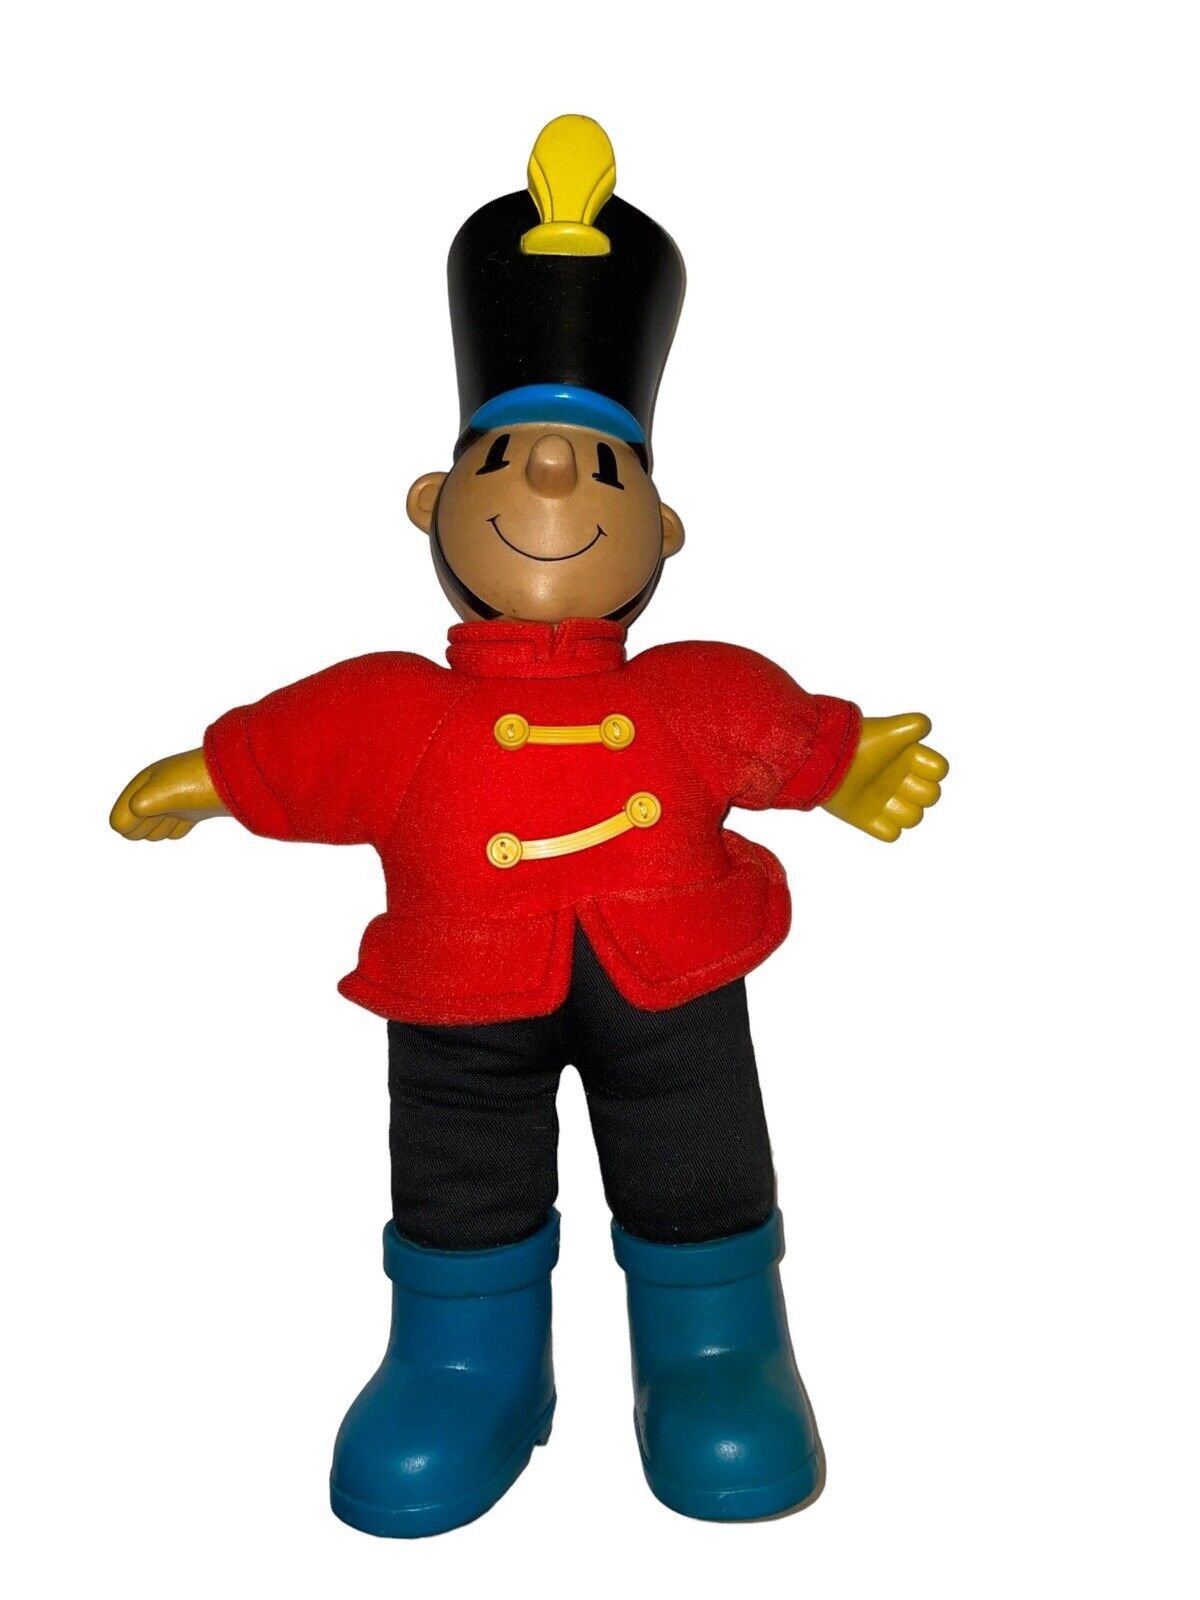 Vintage Rare K.B Toy Stores Soldier Mascot